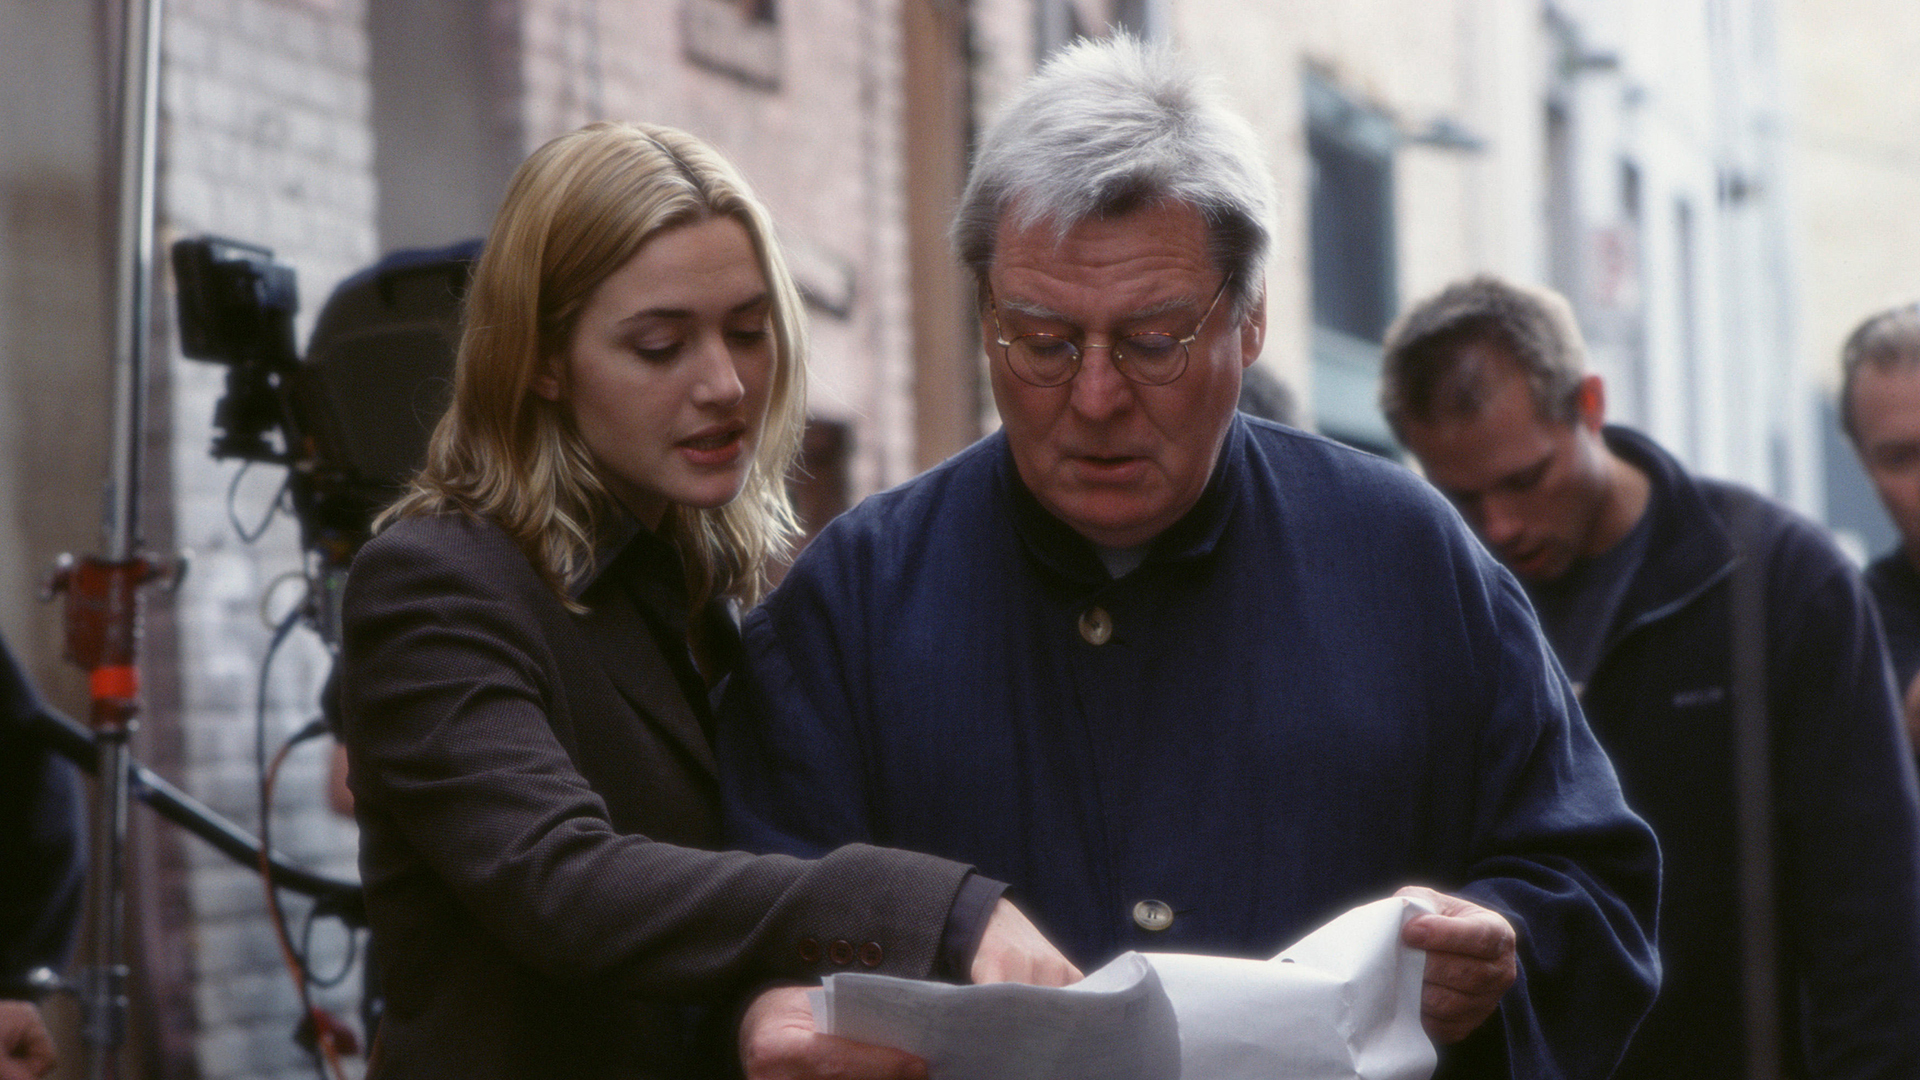 Alan Parker's 9 Iconic Films: A Checklist for the Movie Snob in All of Us